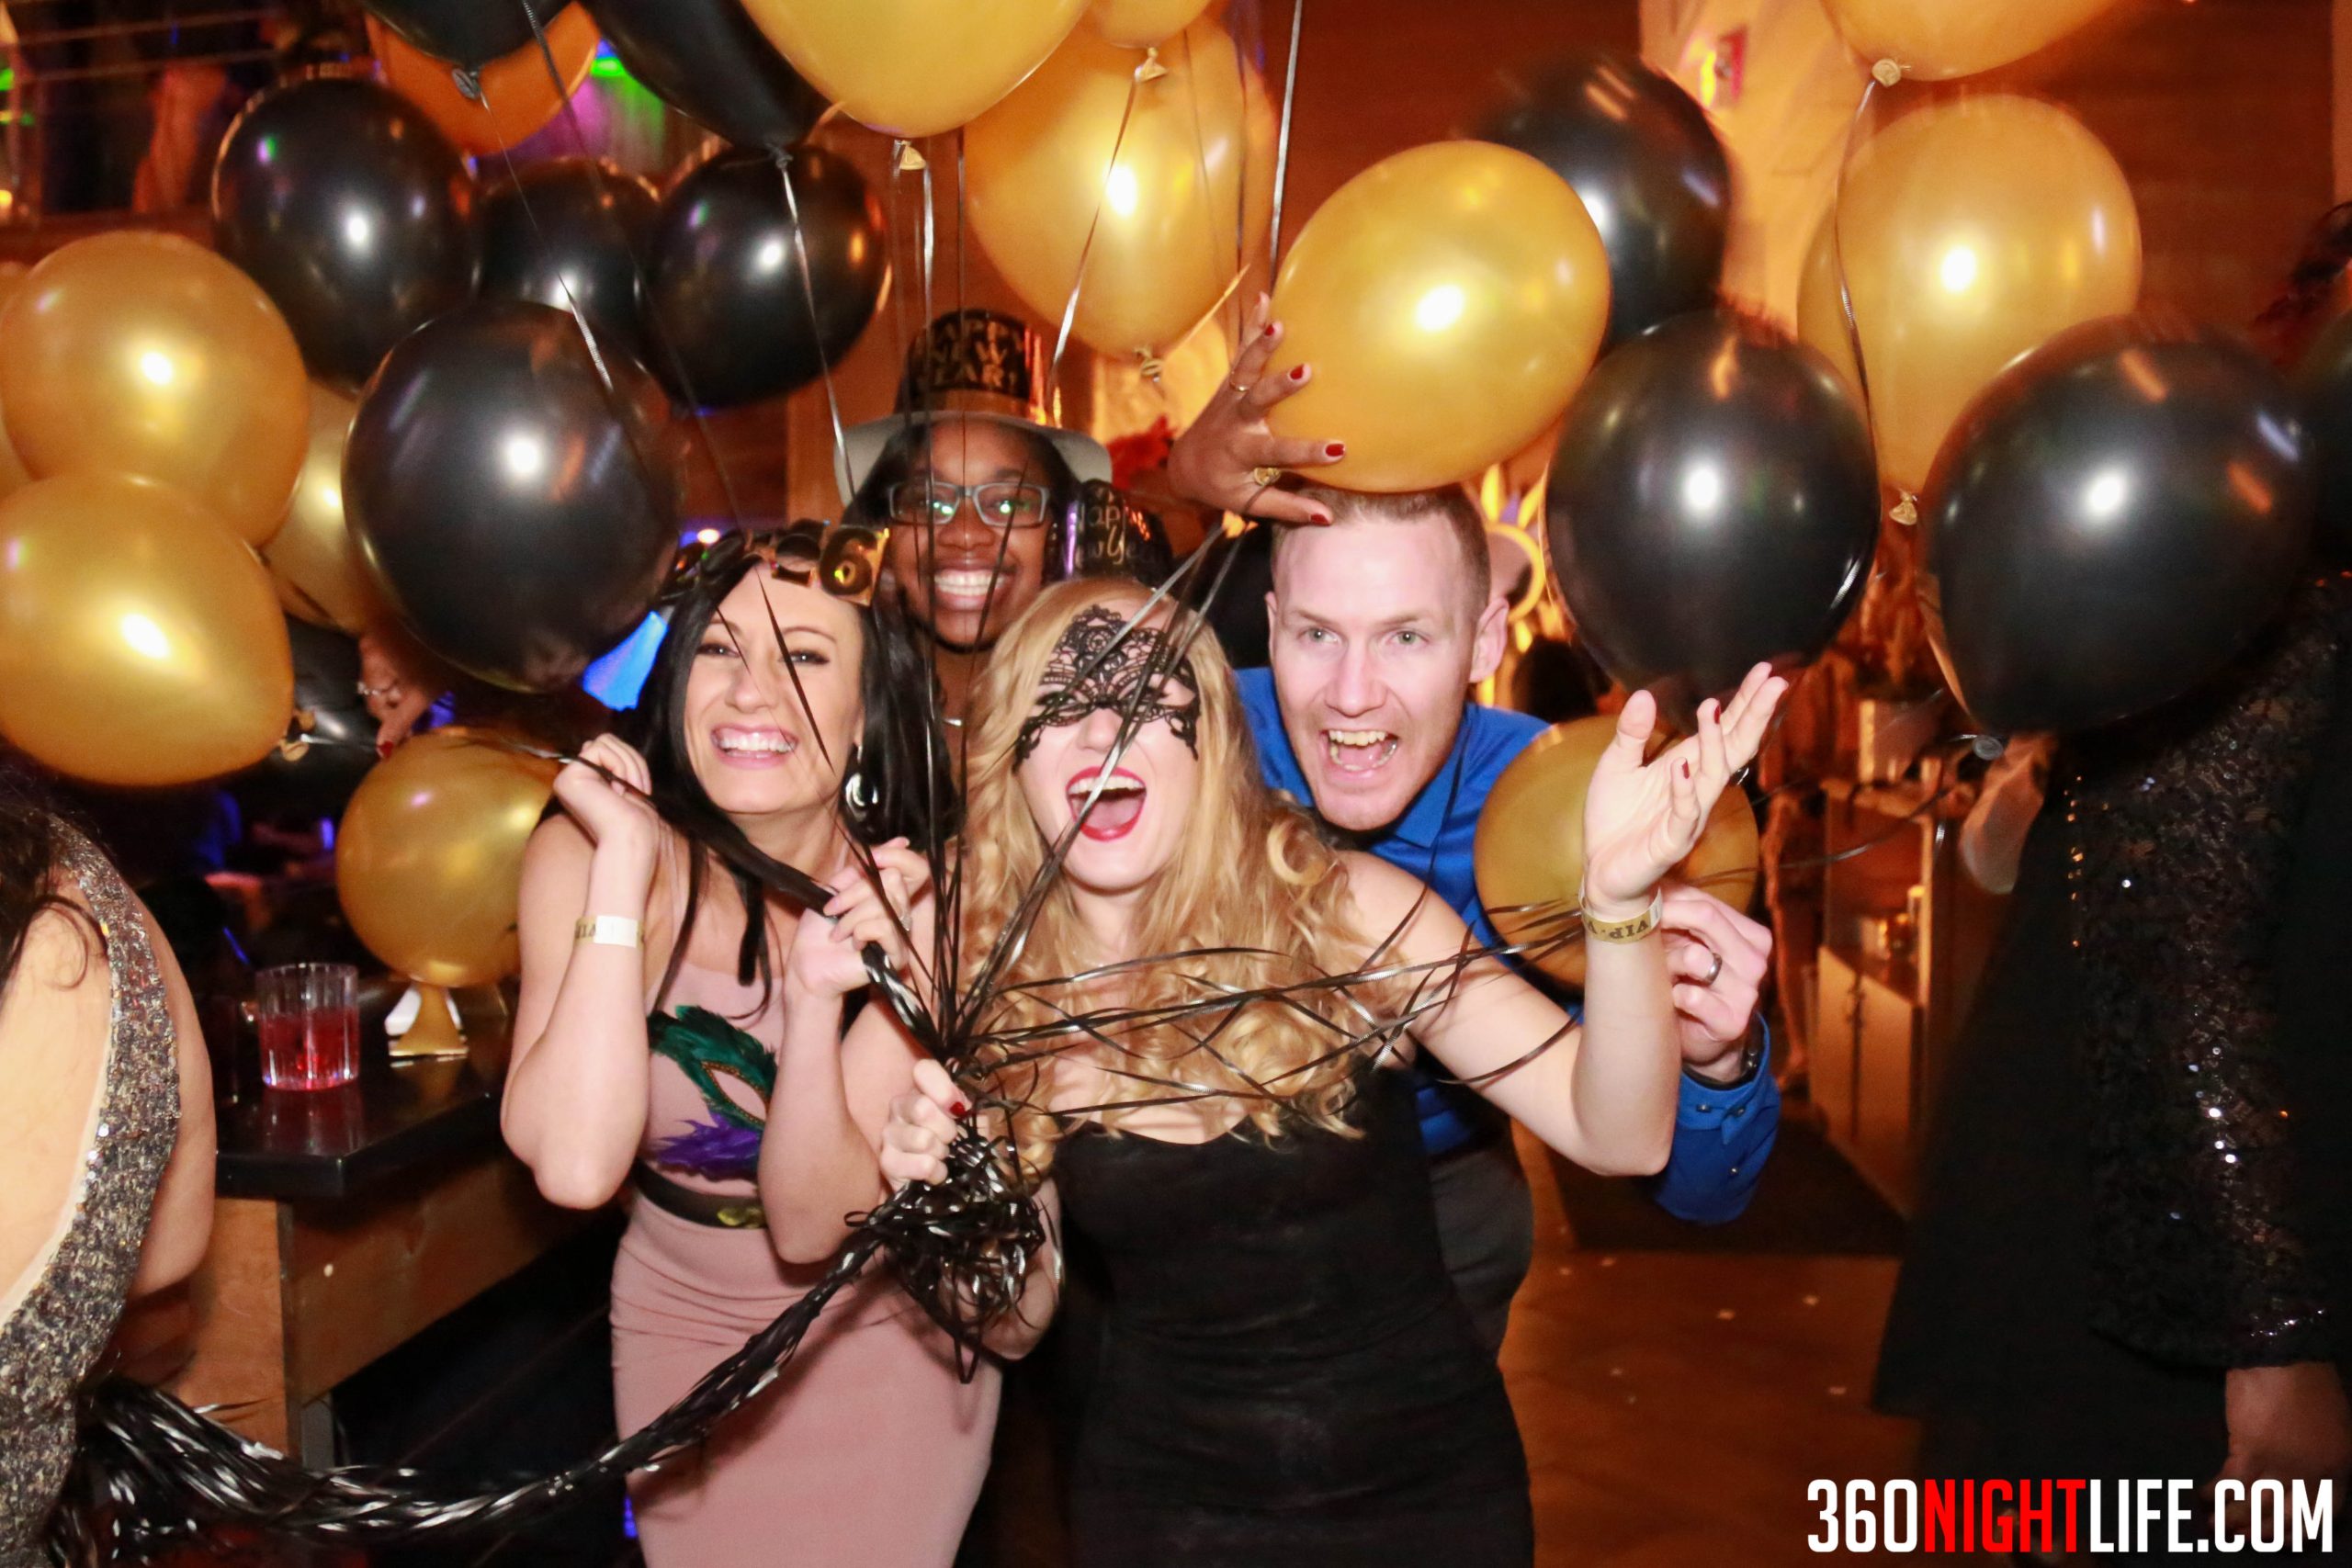 Group at the National New Years Eve Masquerade Ball holding Balloons, event in Washington DC by 360 Nightlife.